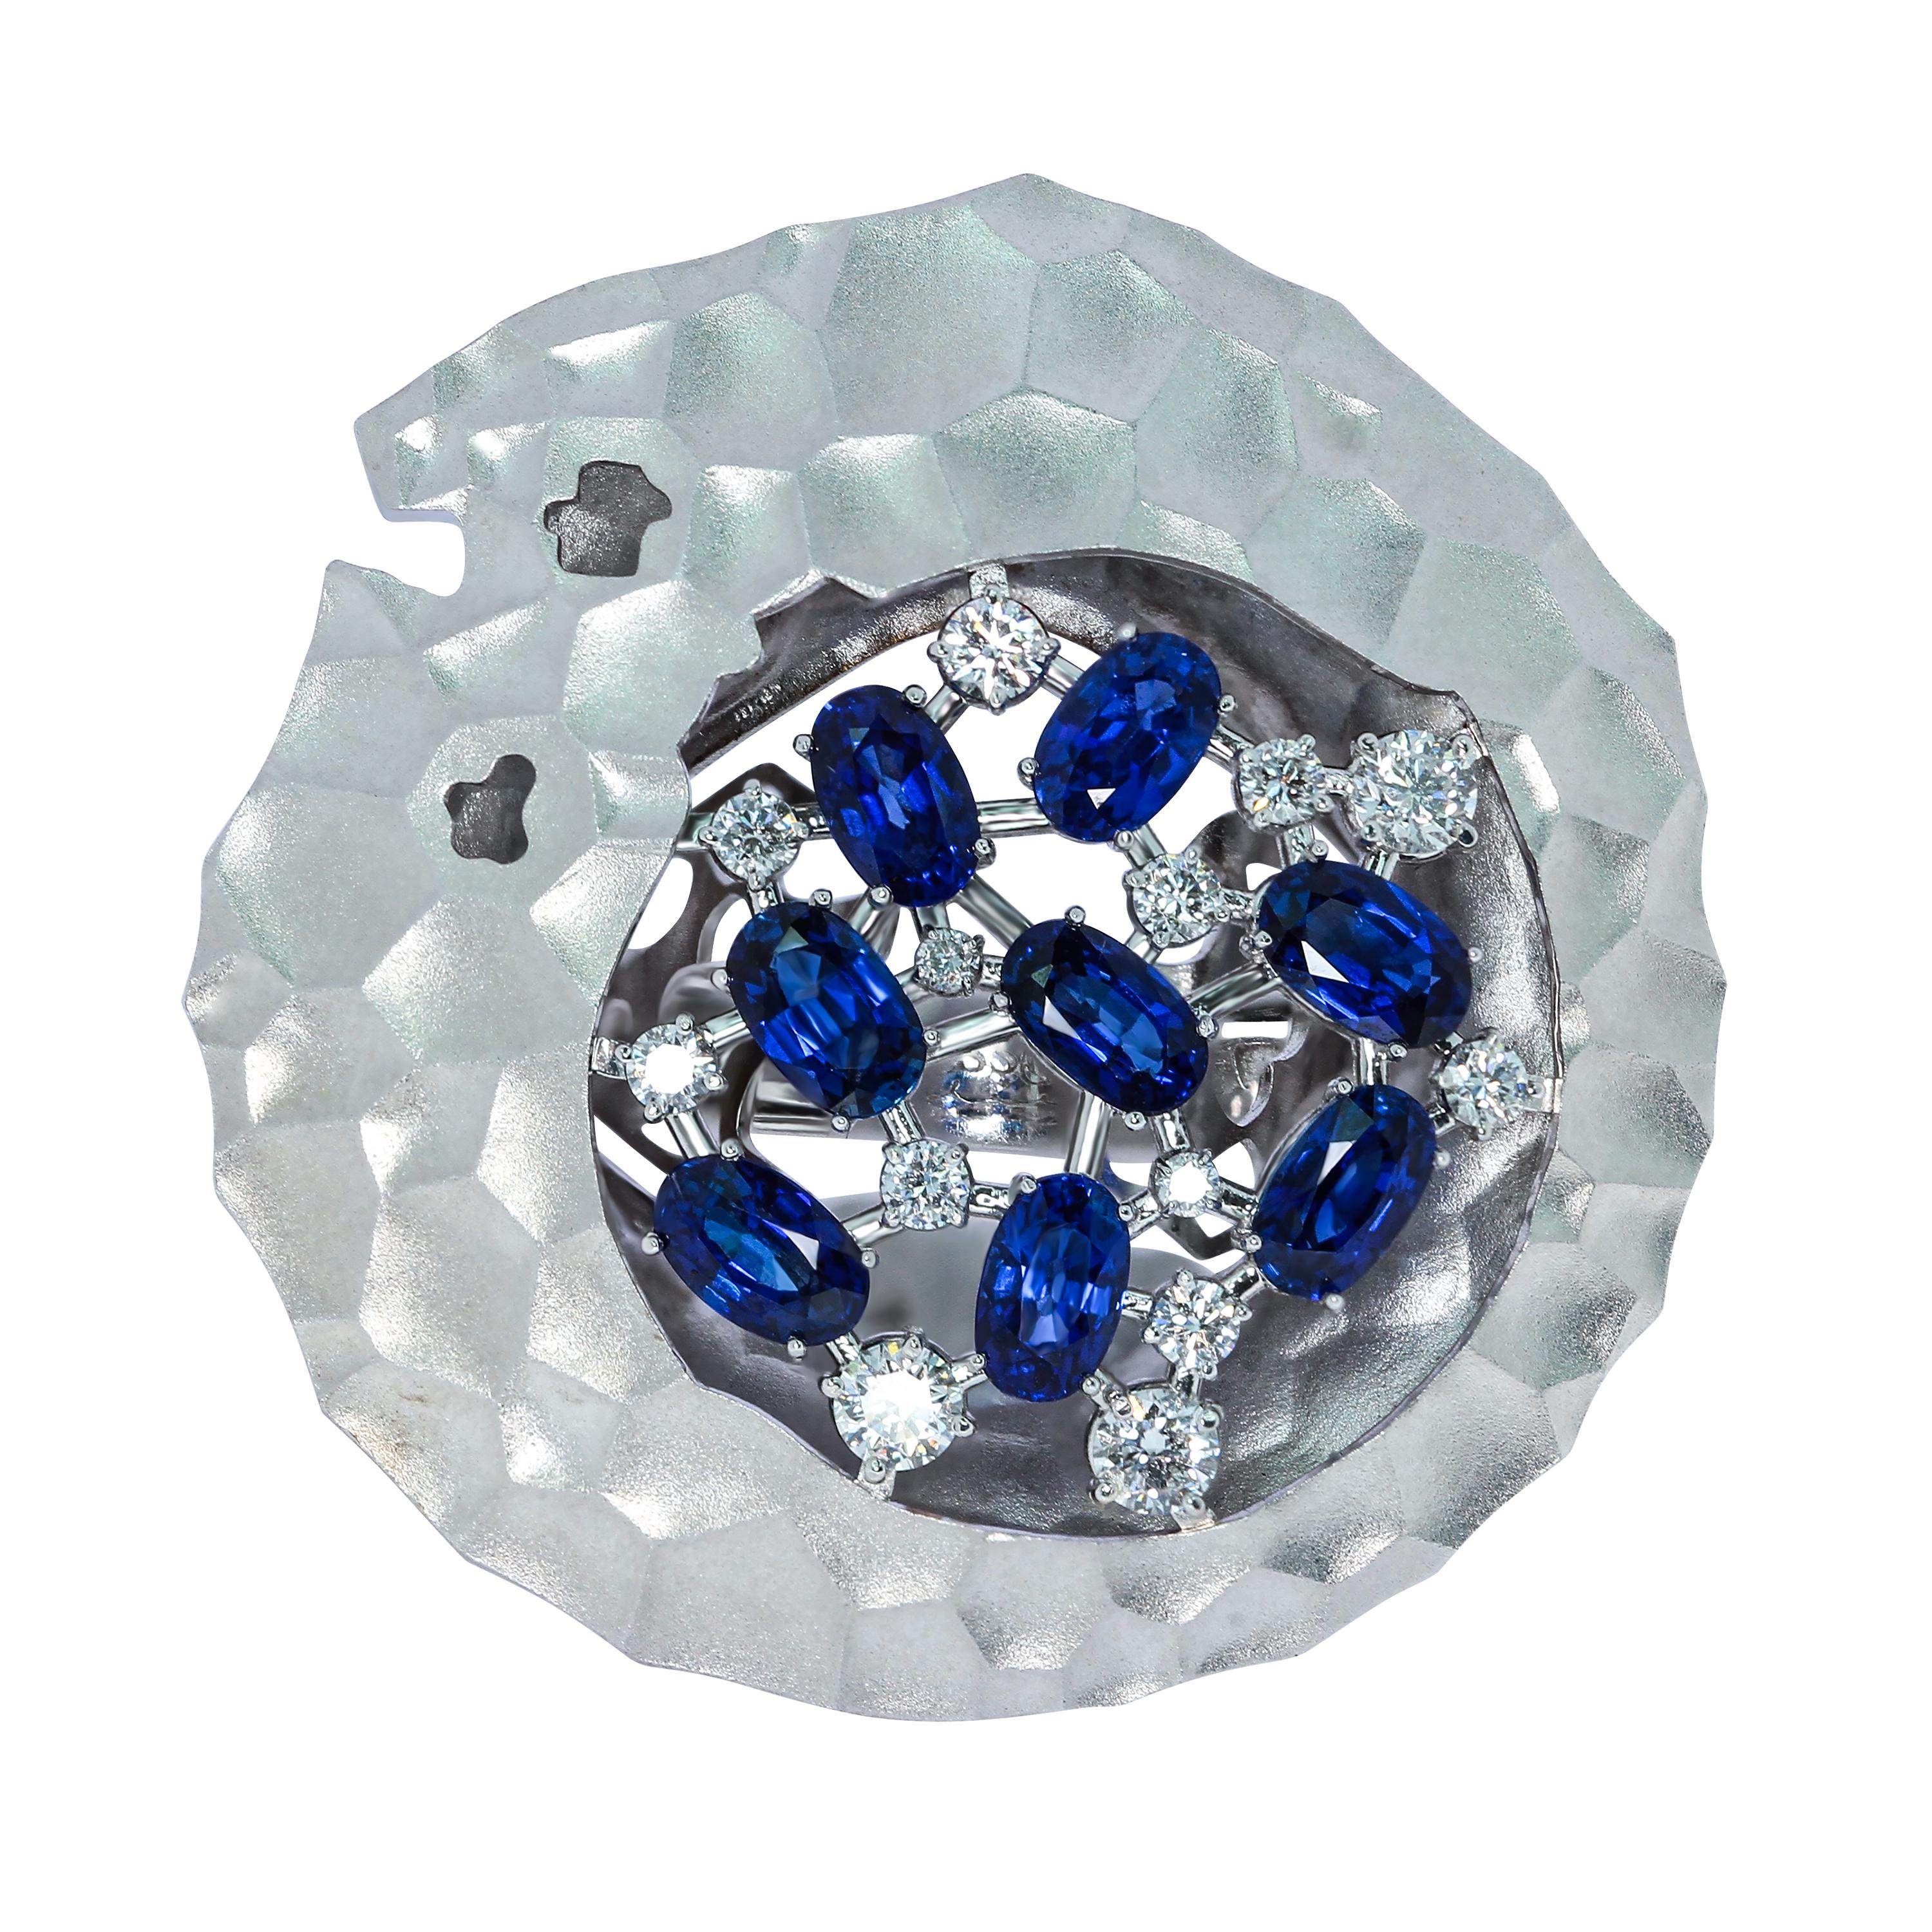 Blue Sapphires Diamonds 18 Karat White Gold Big Oasis Ring
Hot desert - nothing alive around. But it is necessary to appear a sip of water, and life awakens. It was the deserts that inspired our designers to create this Ring. Incredibly dry, the